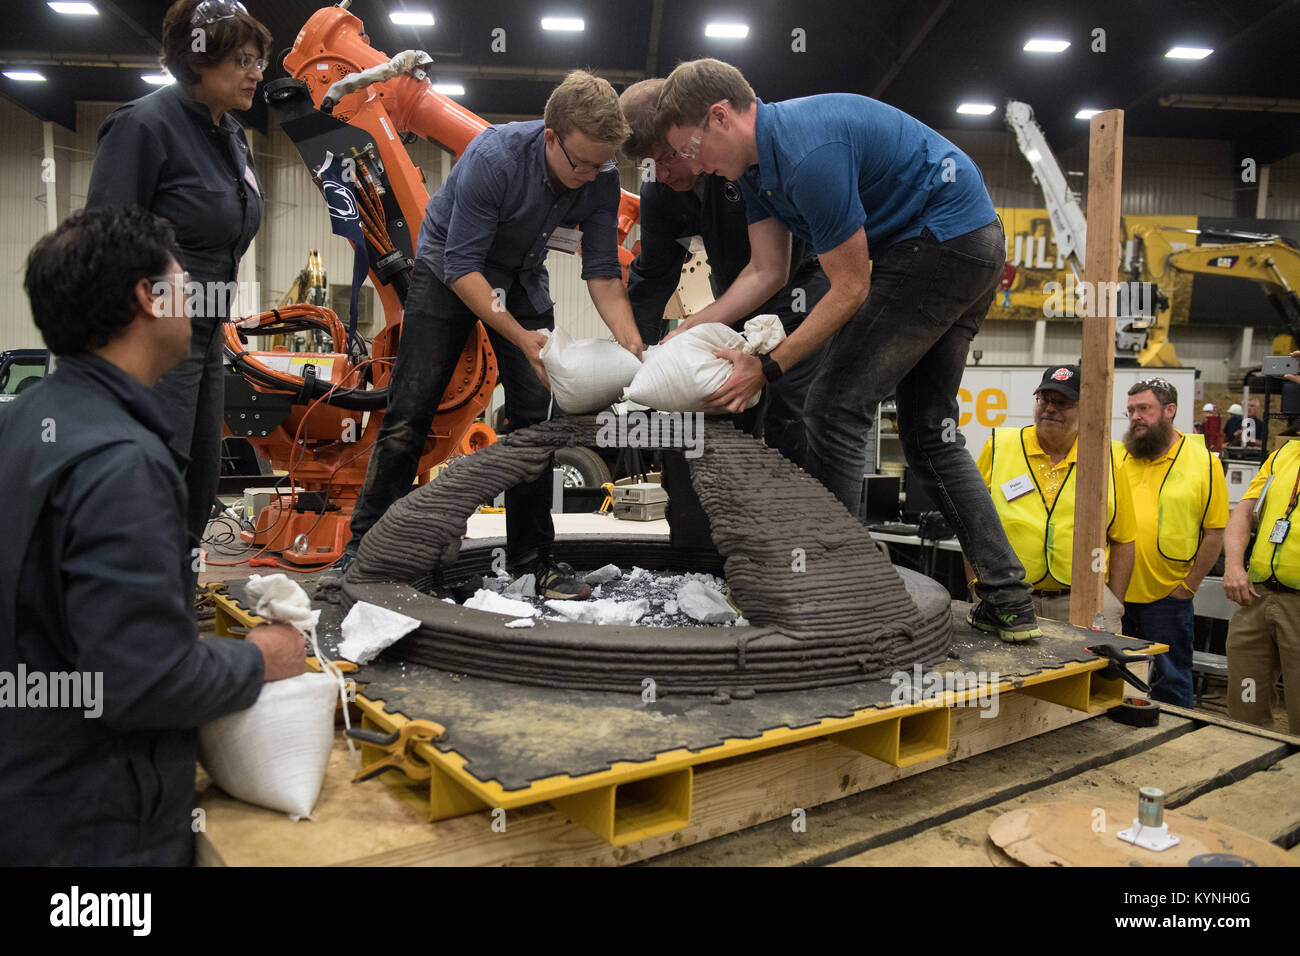 Members of the Penn State Den@Mars team of University Park, Pa., place 50 kilograms of weight on their 3D-printed dome structure in order to qualify for final testing, Saturday, Aug. 26, 2017 at Caterpillar, Inc.'s Edwards Demonstration and Learning Center in Peoria, Ill. NASA's 3D-Printed Habitat Challenge is advancing the additive construction technology needed to create sustainable housing for deep space exploration. Teams are competing in Phase 2: Level 3, for $500,000 in prize money. Teams have to 3D-print structural habitat pieces that will be crush-tested and evaluated, and teams will b Stock Photo